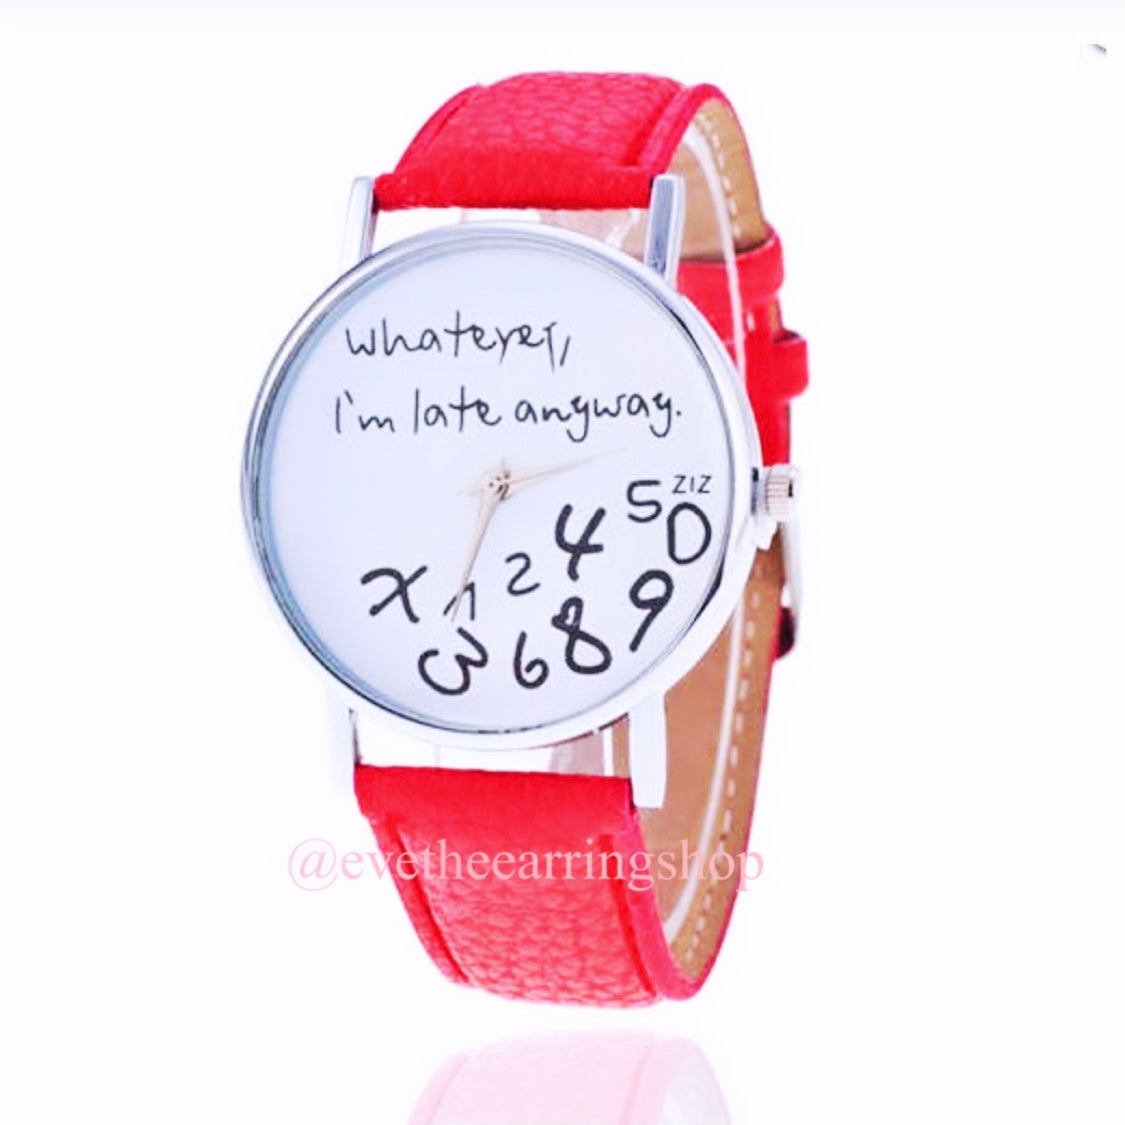 "I'M LATE" Casual Style Fashion Wrist Watch (Multiple Colours)